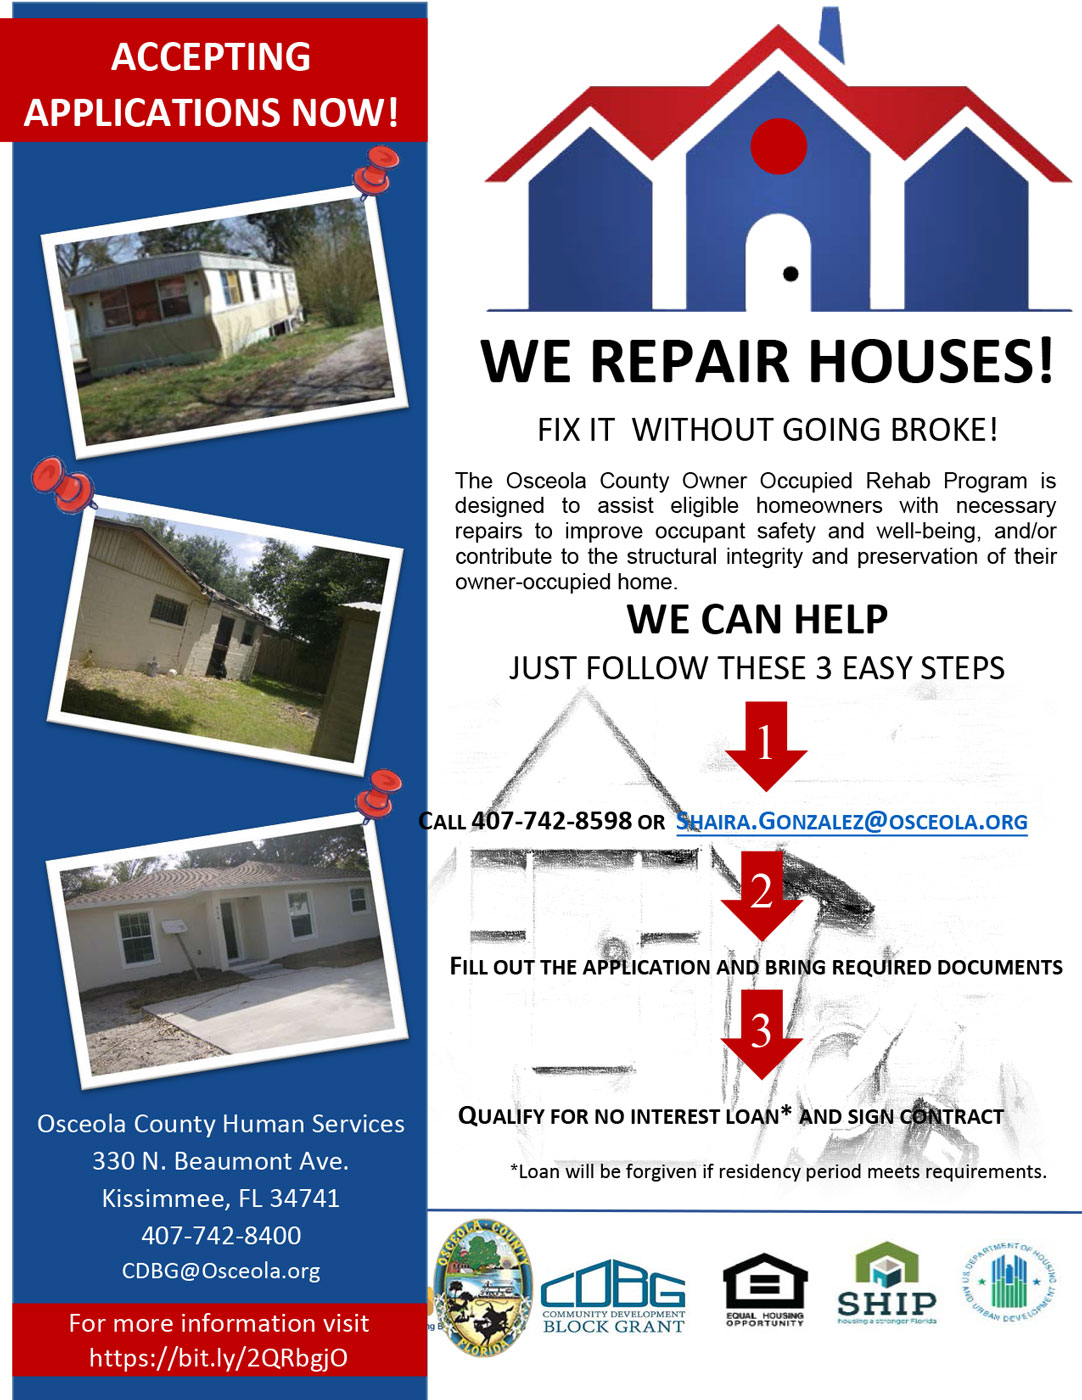 ACCEPTING APPLICATIONS NOW! WE REPAIR HOUSES!FIX IT WITHOUT GOING BROKE!*Loan will be forgiven if residency period meets requirements.The Osceola County Owner Occupied Rehab Program is designed to assist eligible homeowners with necessary repairs to improve occupant safety and well-being, and/or contribute to the structural integrity and preservation of their owner-occupied home. WE CAN HELP JUST FOLLOW THESE 3 EASY STEPS. 1 CALL 407-742-8598 OR SHAIRA.GONZALEZ@OSCEOLA.ORG. 2 FILL OUT THE APPLICATION AND BRING REQUIRED DOCUMENTS. 3 QUALIFY FOR NO INTEREST LOAN* AND SIGN CONTRACT.*Loan will be forgiven if residency period meets requirements.Osceola County Human Services 330 N. Beaumont Ave. Kissimmee, FL 34741 407-742-8400 CDBG@Osceola.org ACCEPTING APPLICATIONS NOW! For more information visit https://bit.ly/2QRbgjO